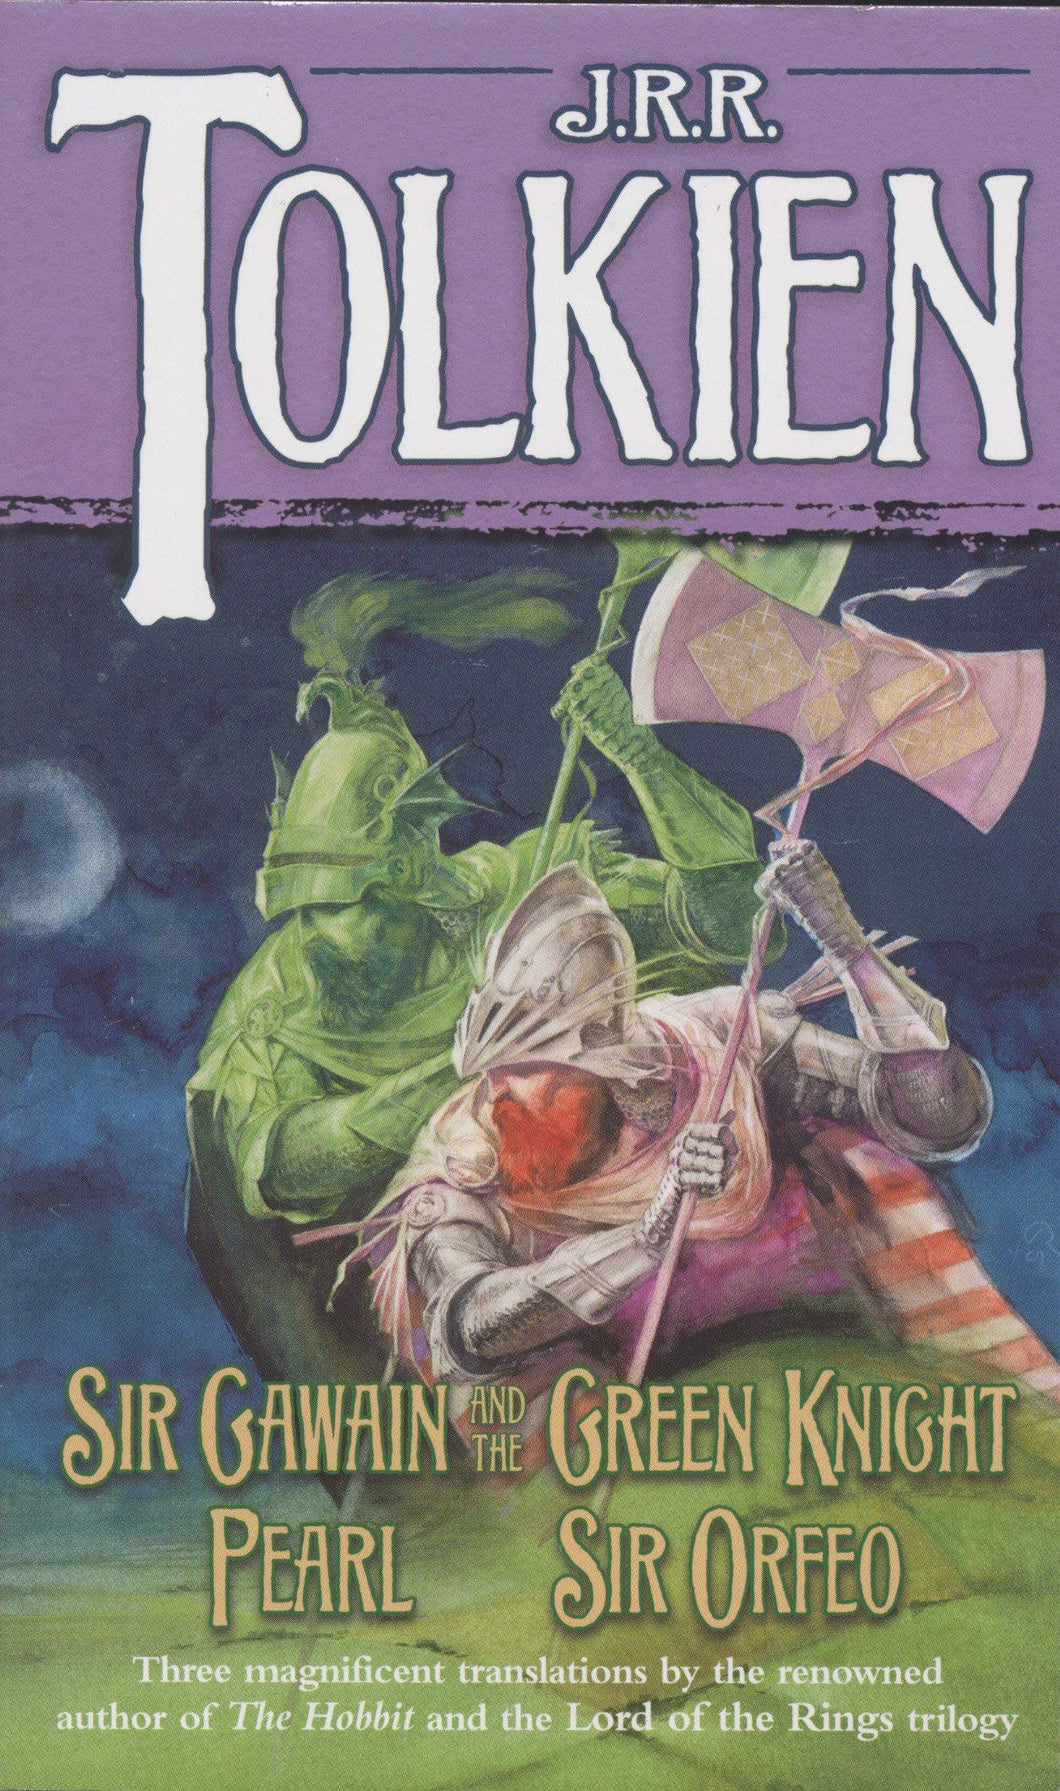 Sir Gawain and the Green Knight, Pearl, and Sir Orfeo -   J.R.R. Tolkien